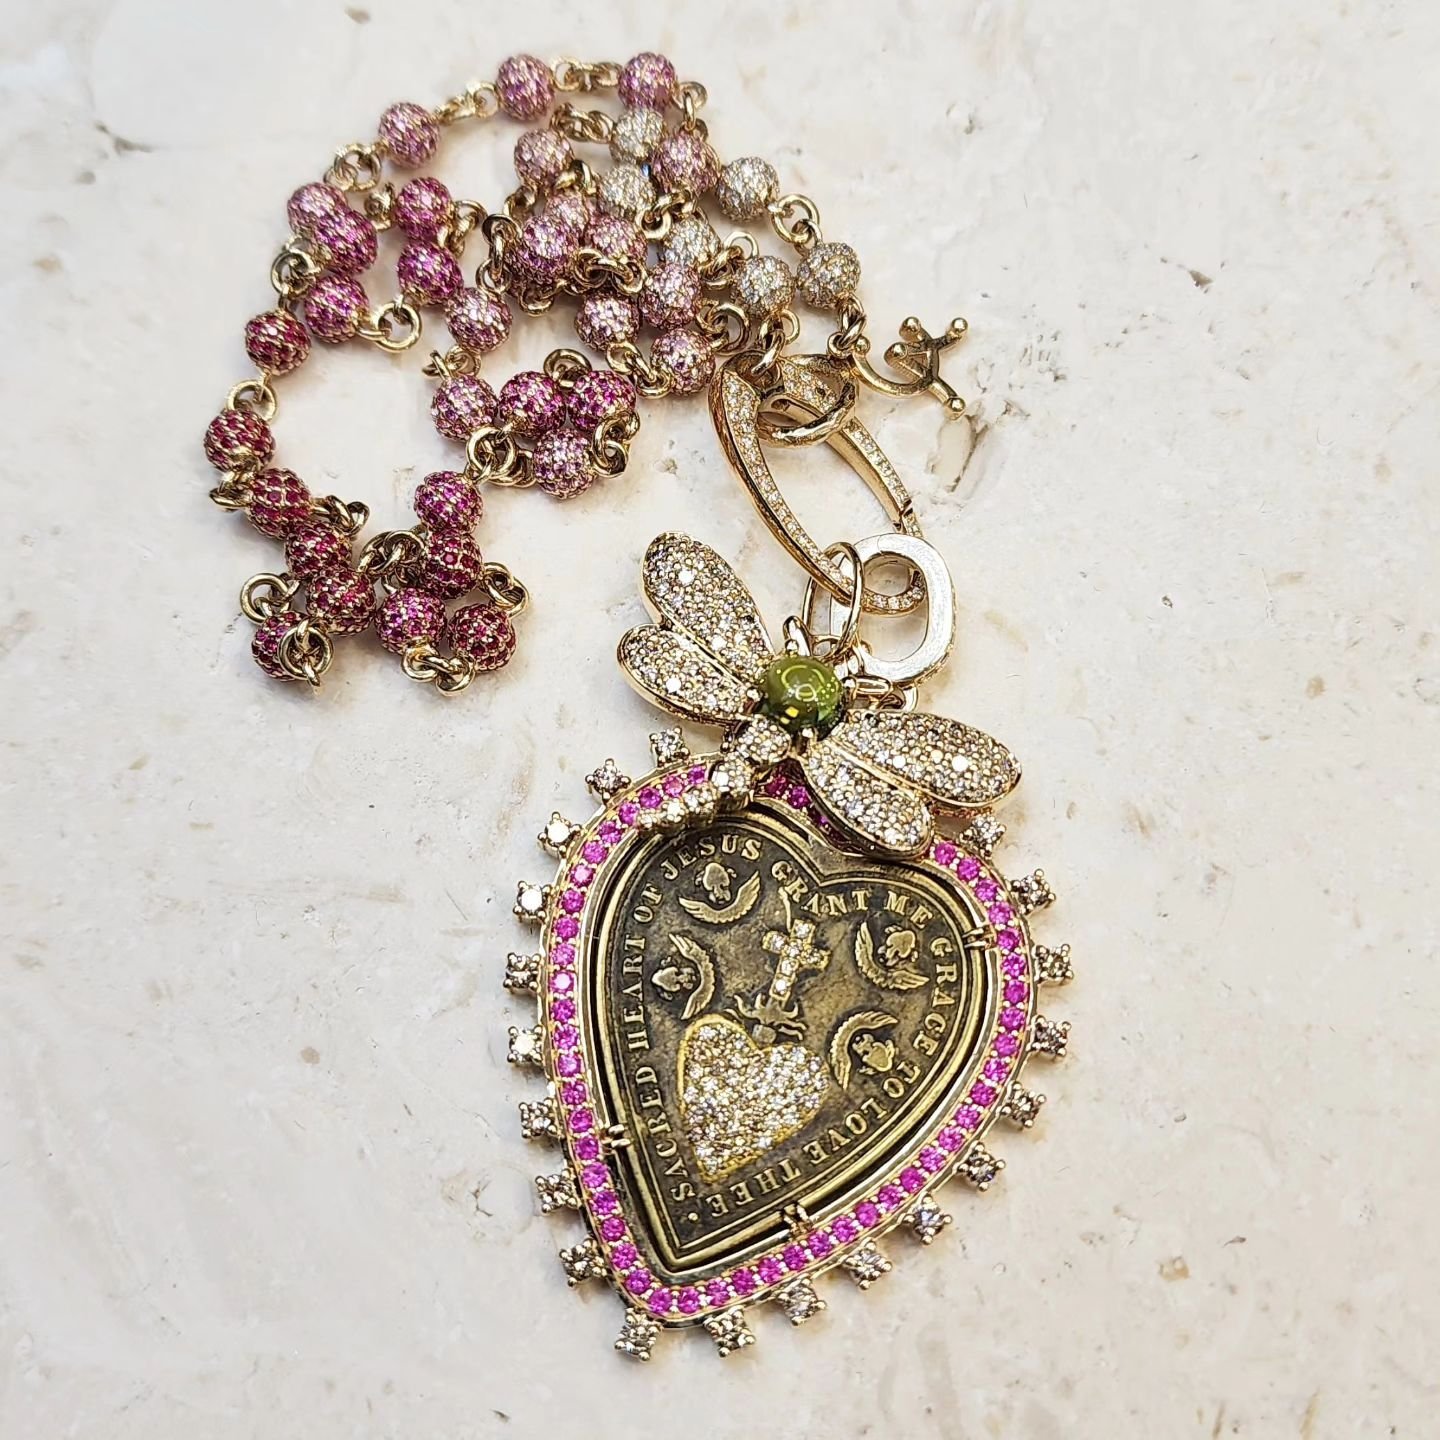 Spanish Antique Bronze Sacred Heart Medal Pendant with 14k Yellow Gold, Pink Sapphire and Diamond Bezel